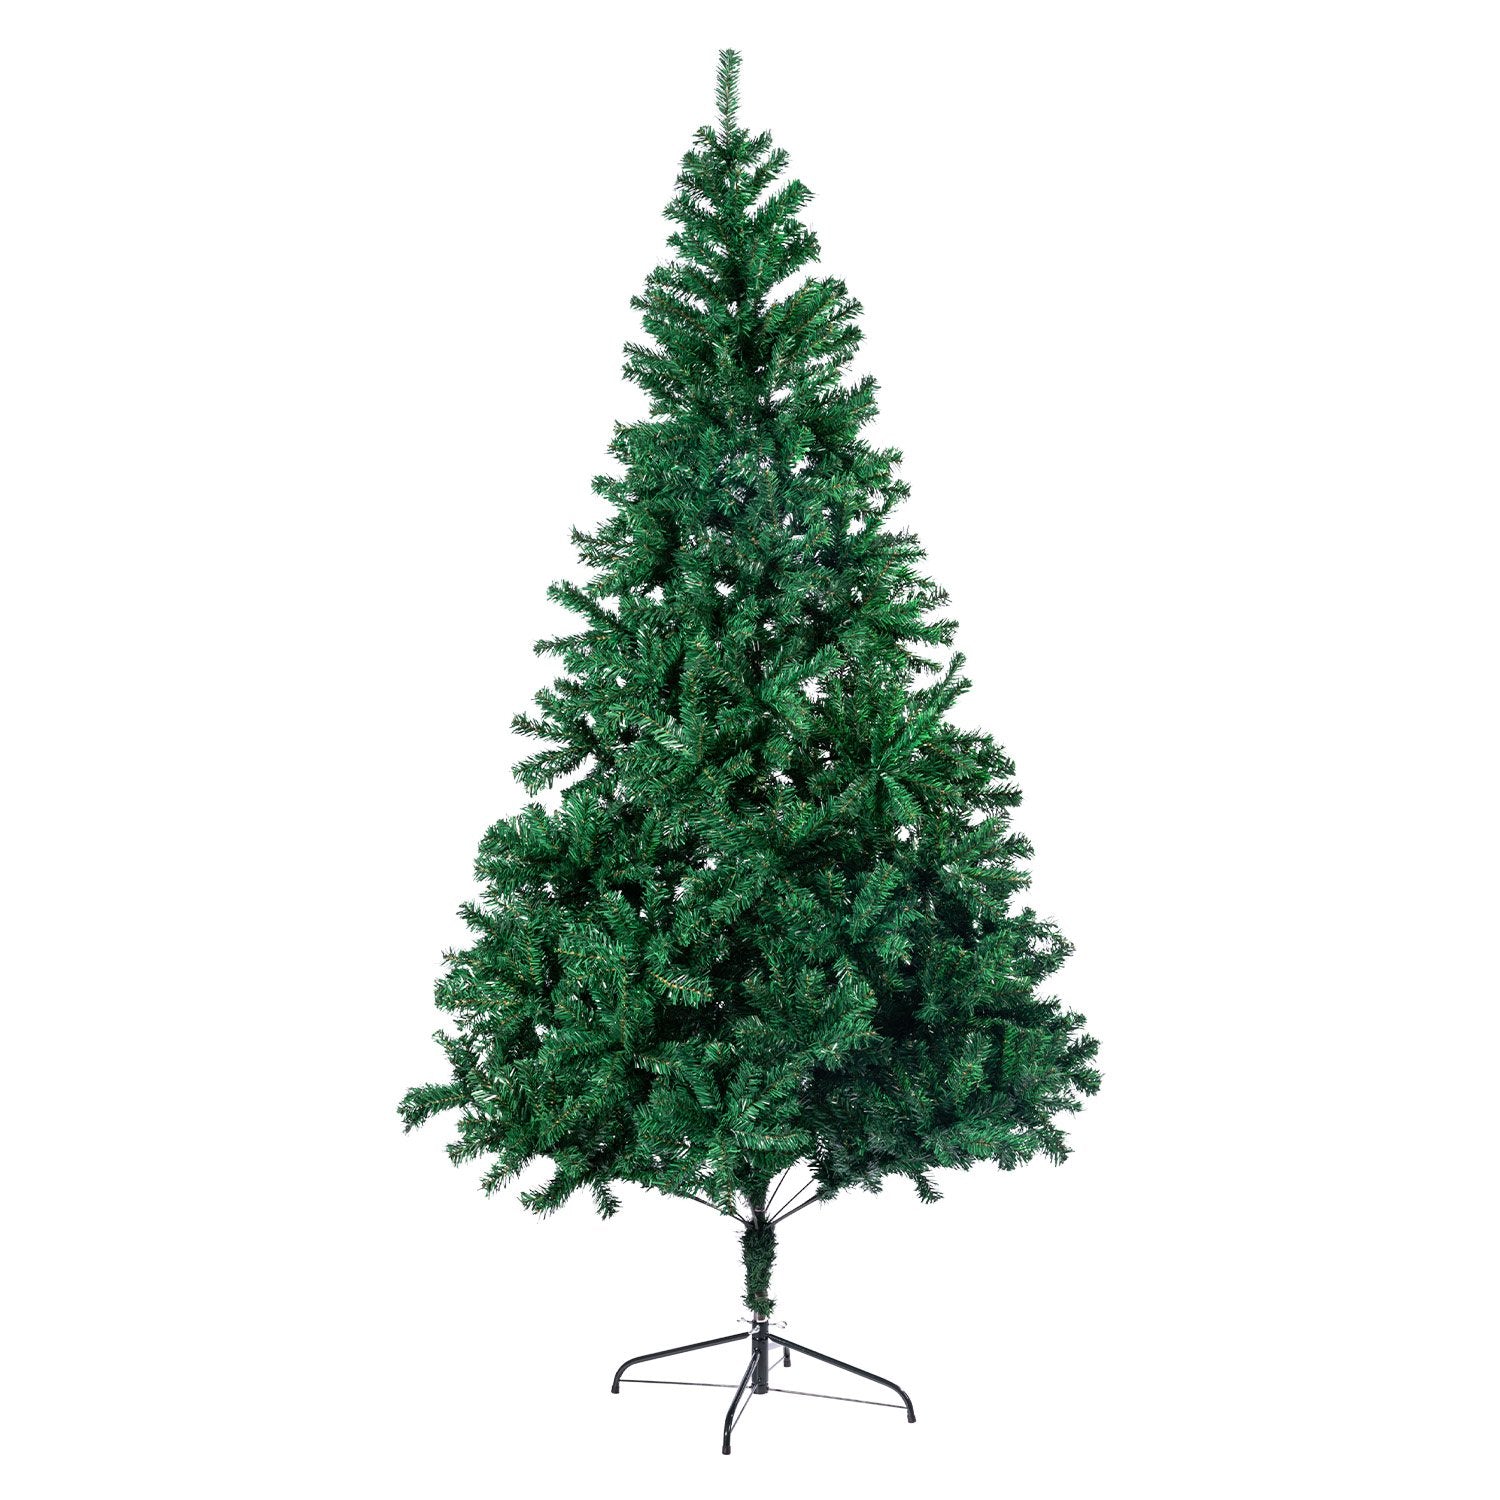 Christabelle Green Christmas Tree 1.8m Xmas Decor Decorations - 850 Tips - SILBERSHELL